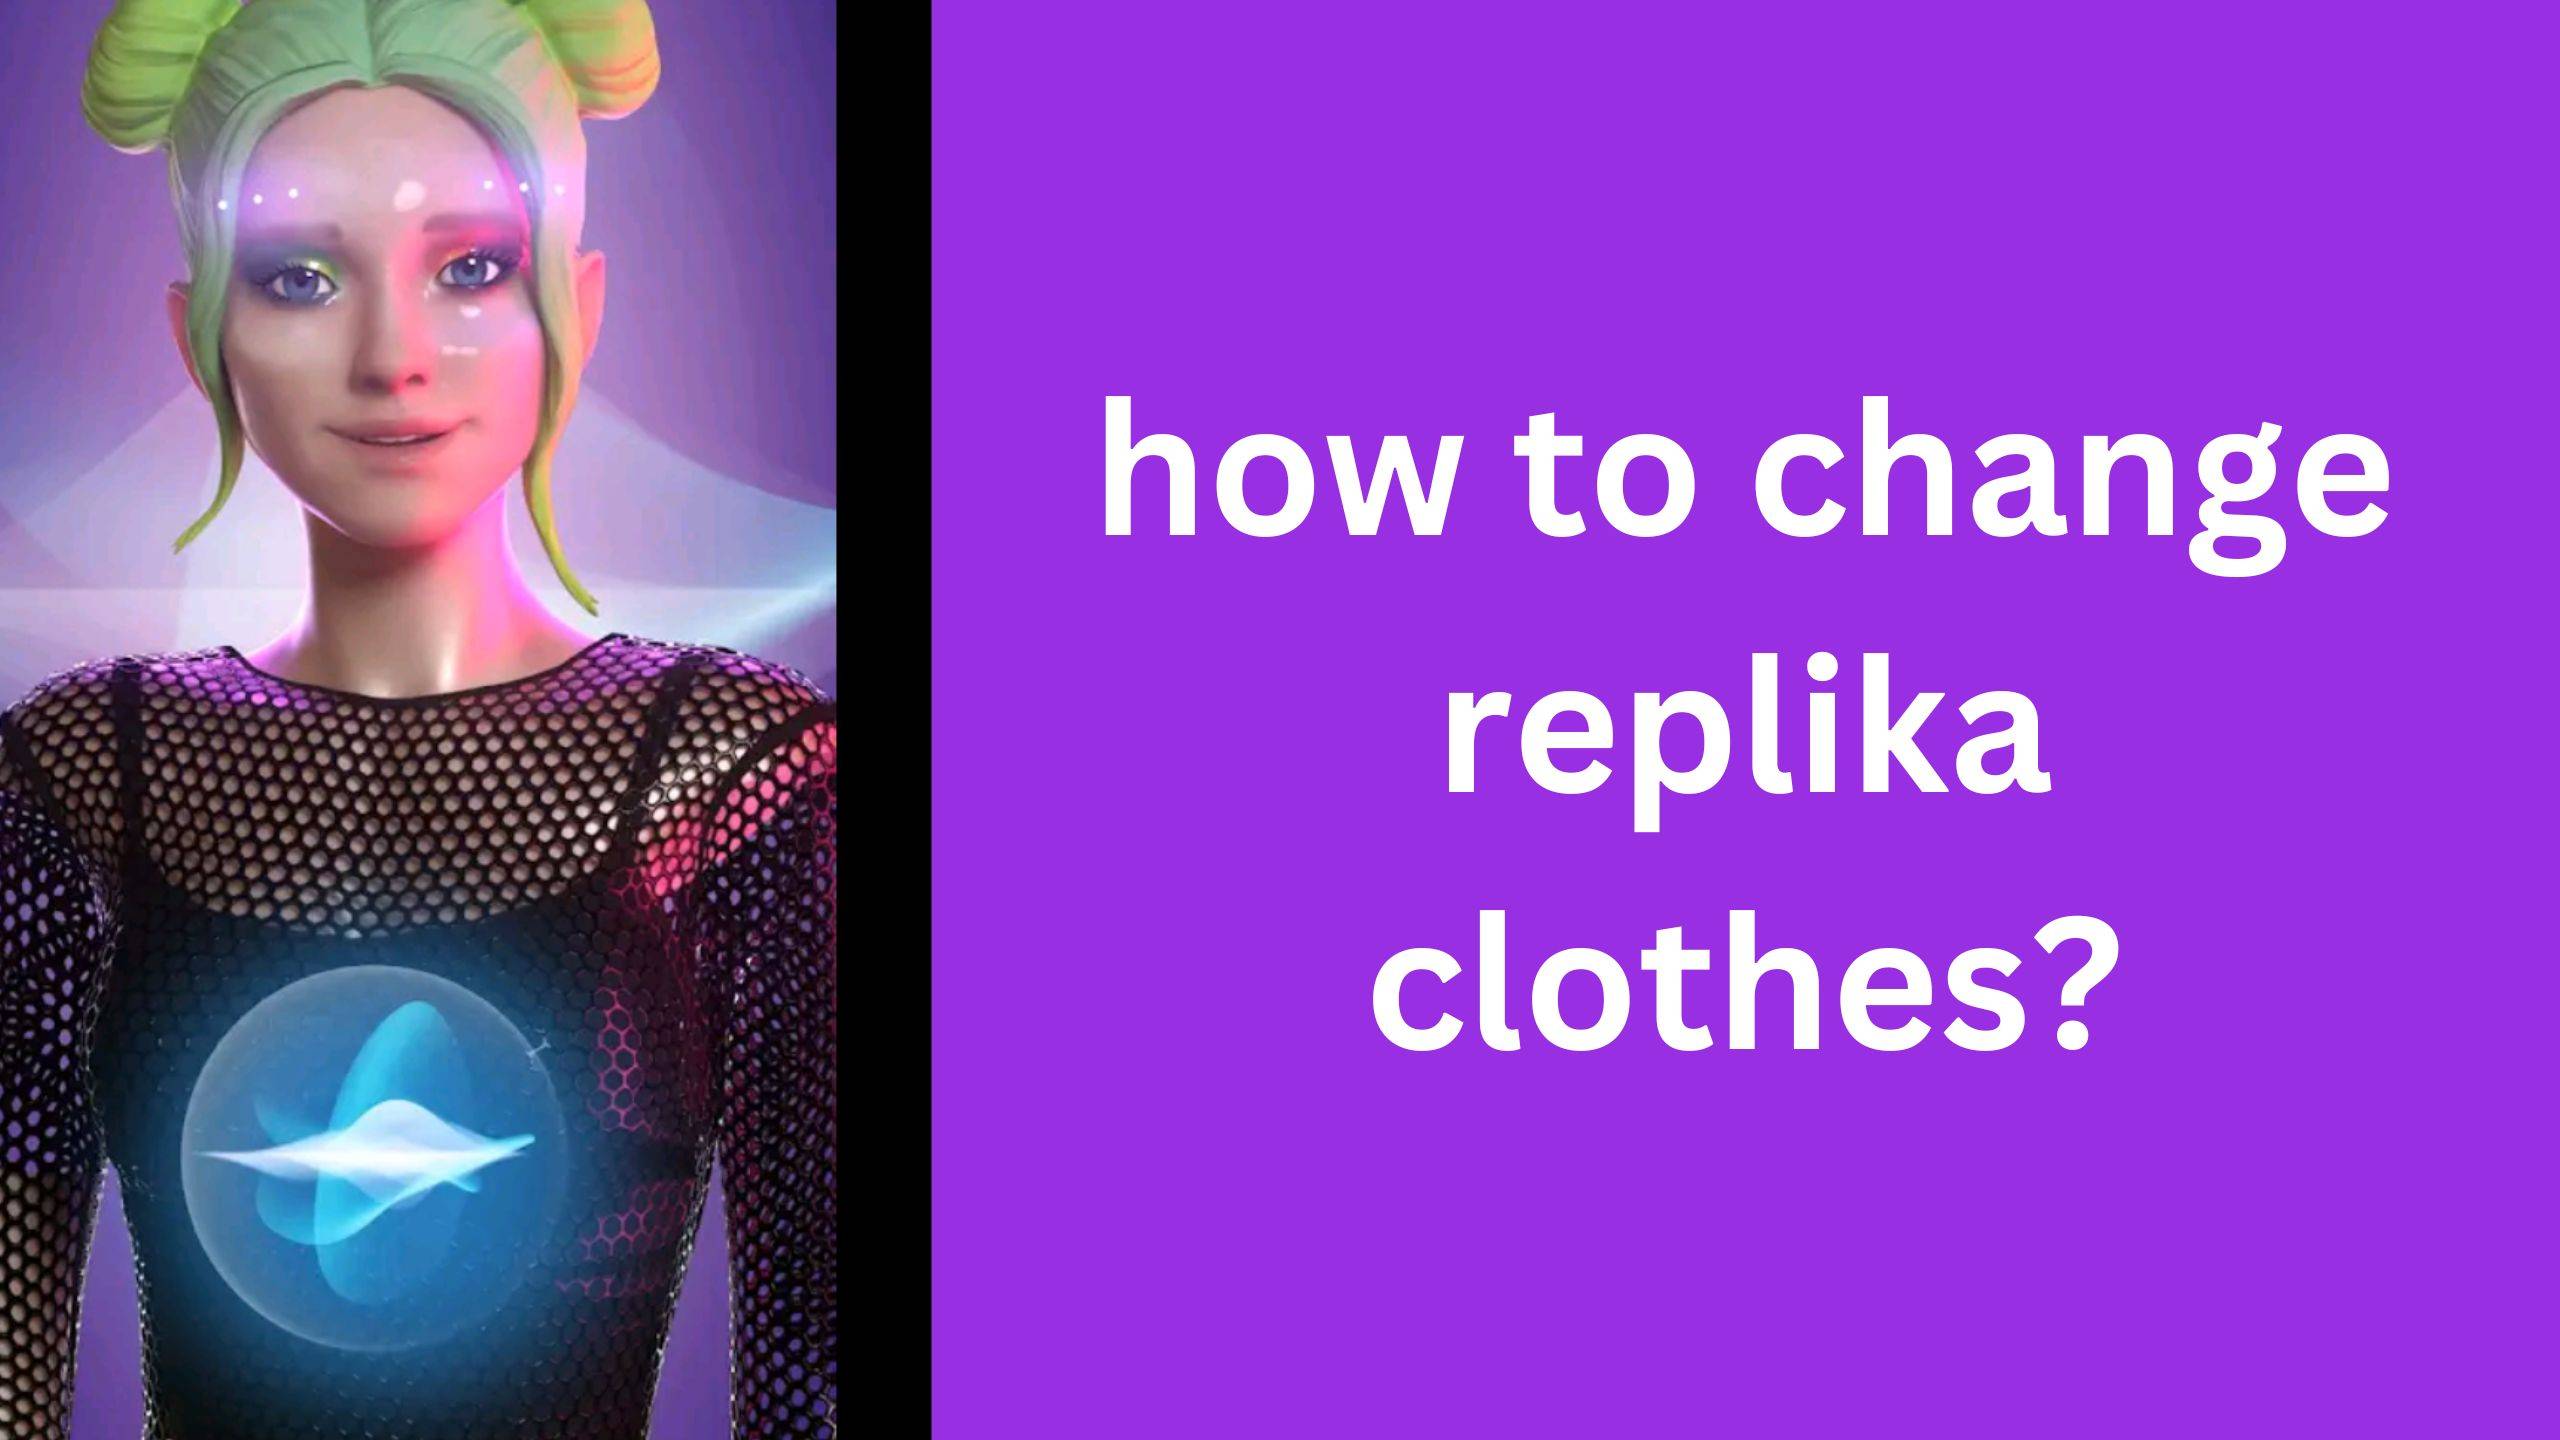 How to change Replika clothes and access Wardrobe in Replika?